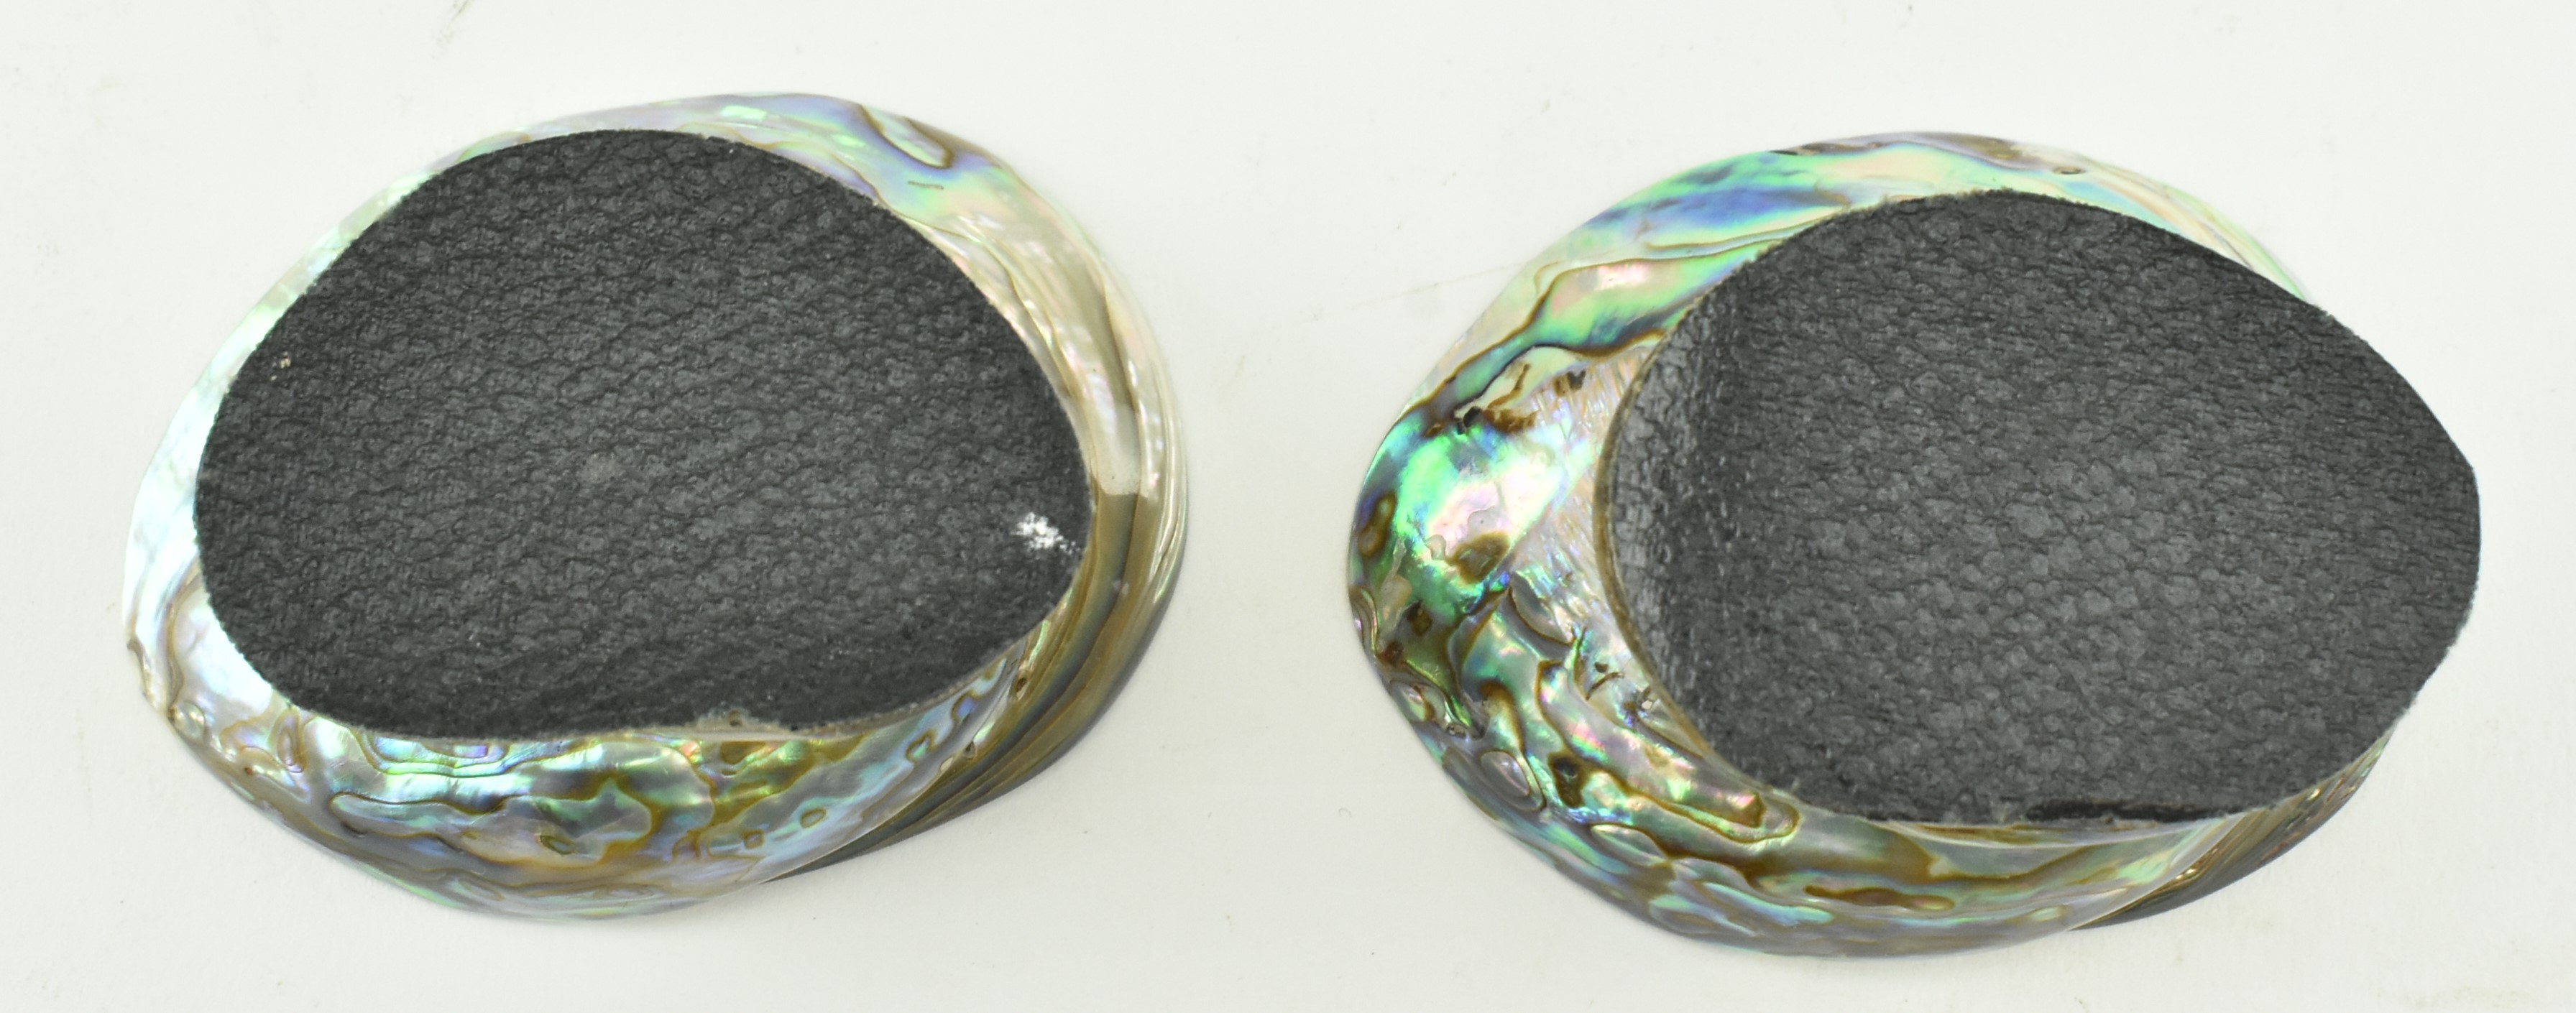 COLLECTION OF VINTAGE ABALONE ITEMS, INCL. SALT & PEPPER SHAKERS - Image 6 of 12